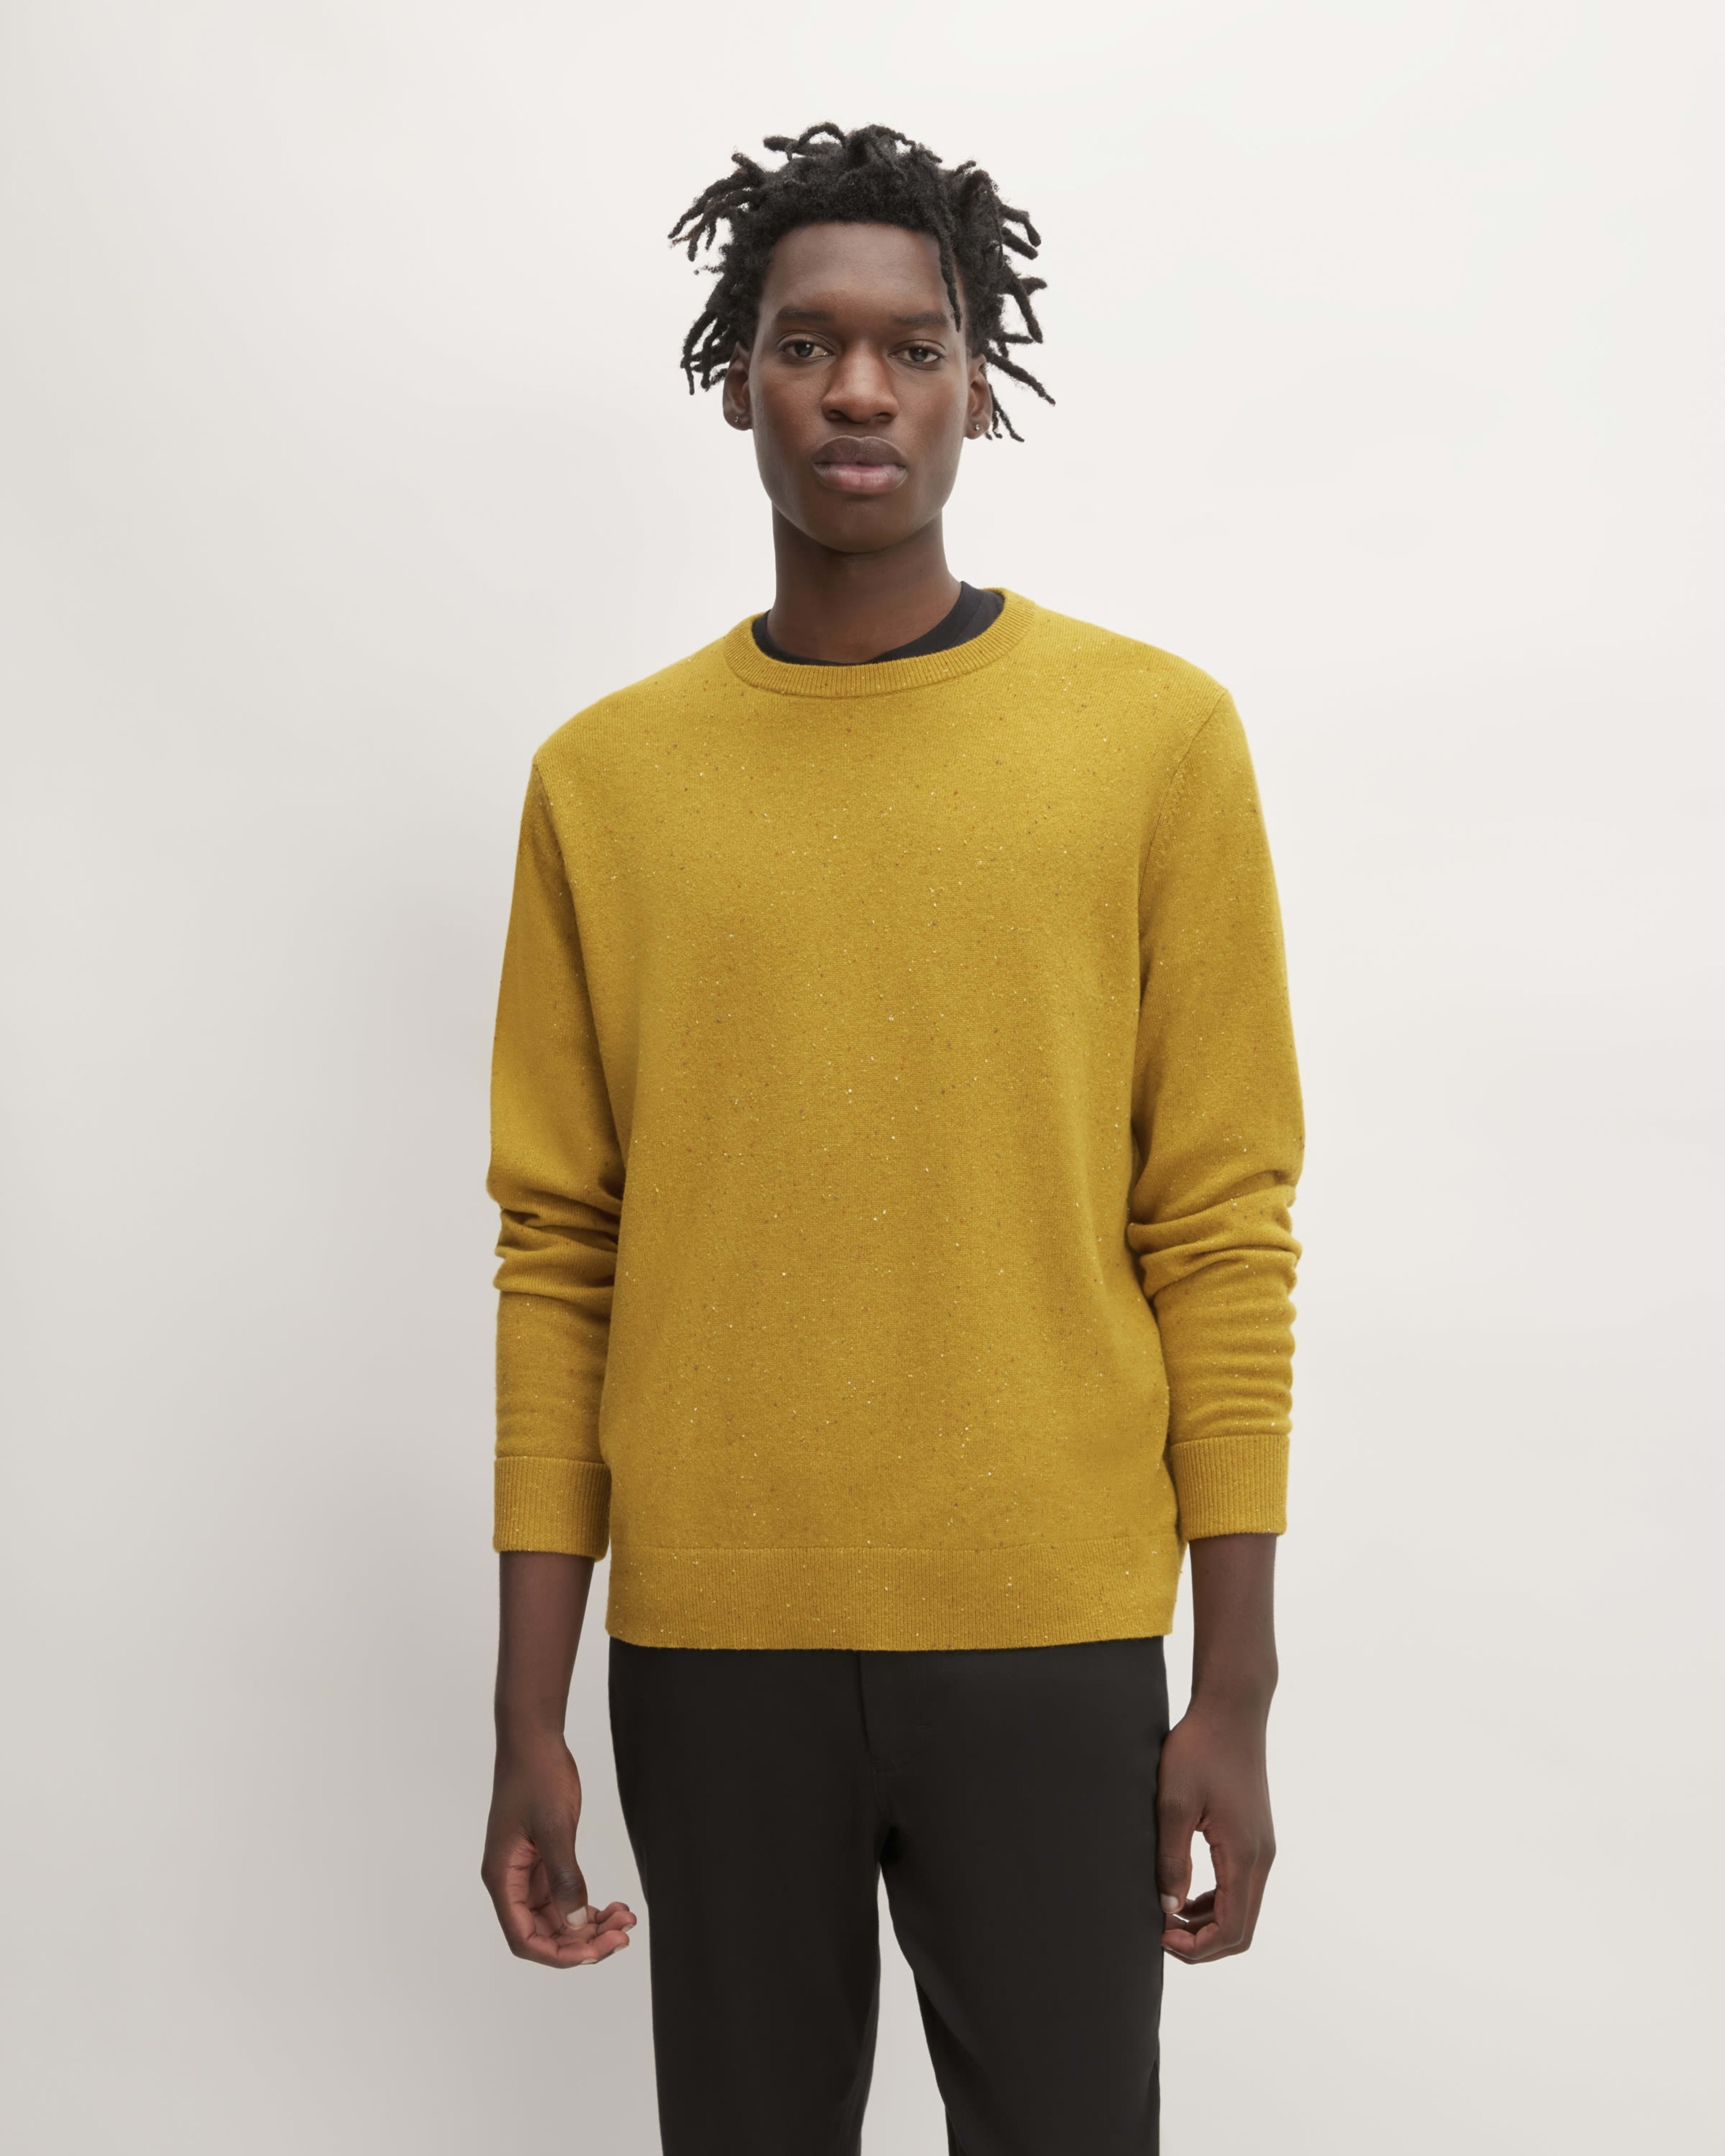 Men's Statement Donegal Sweater